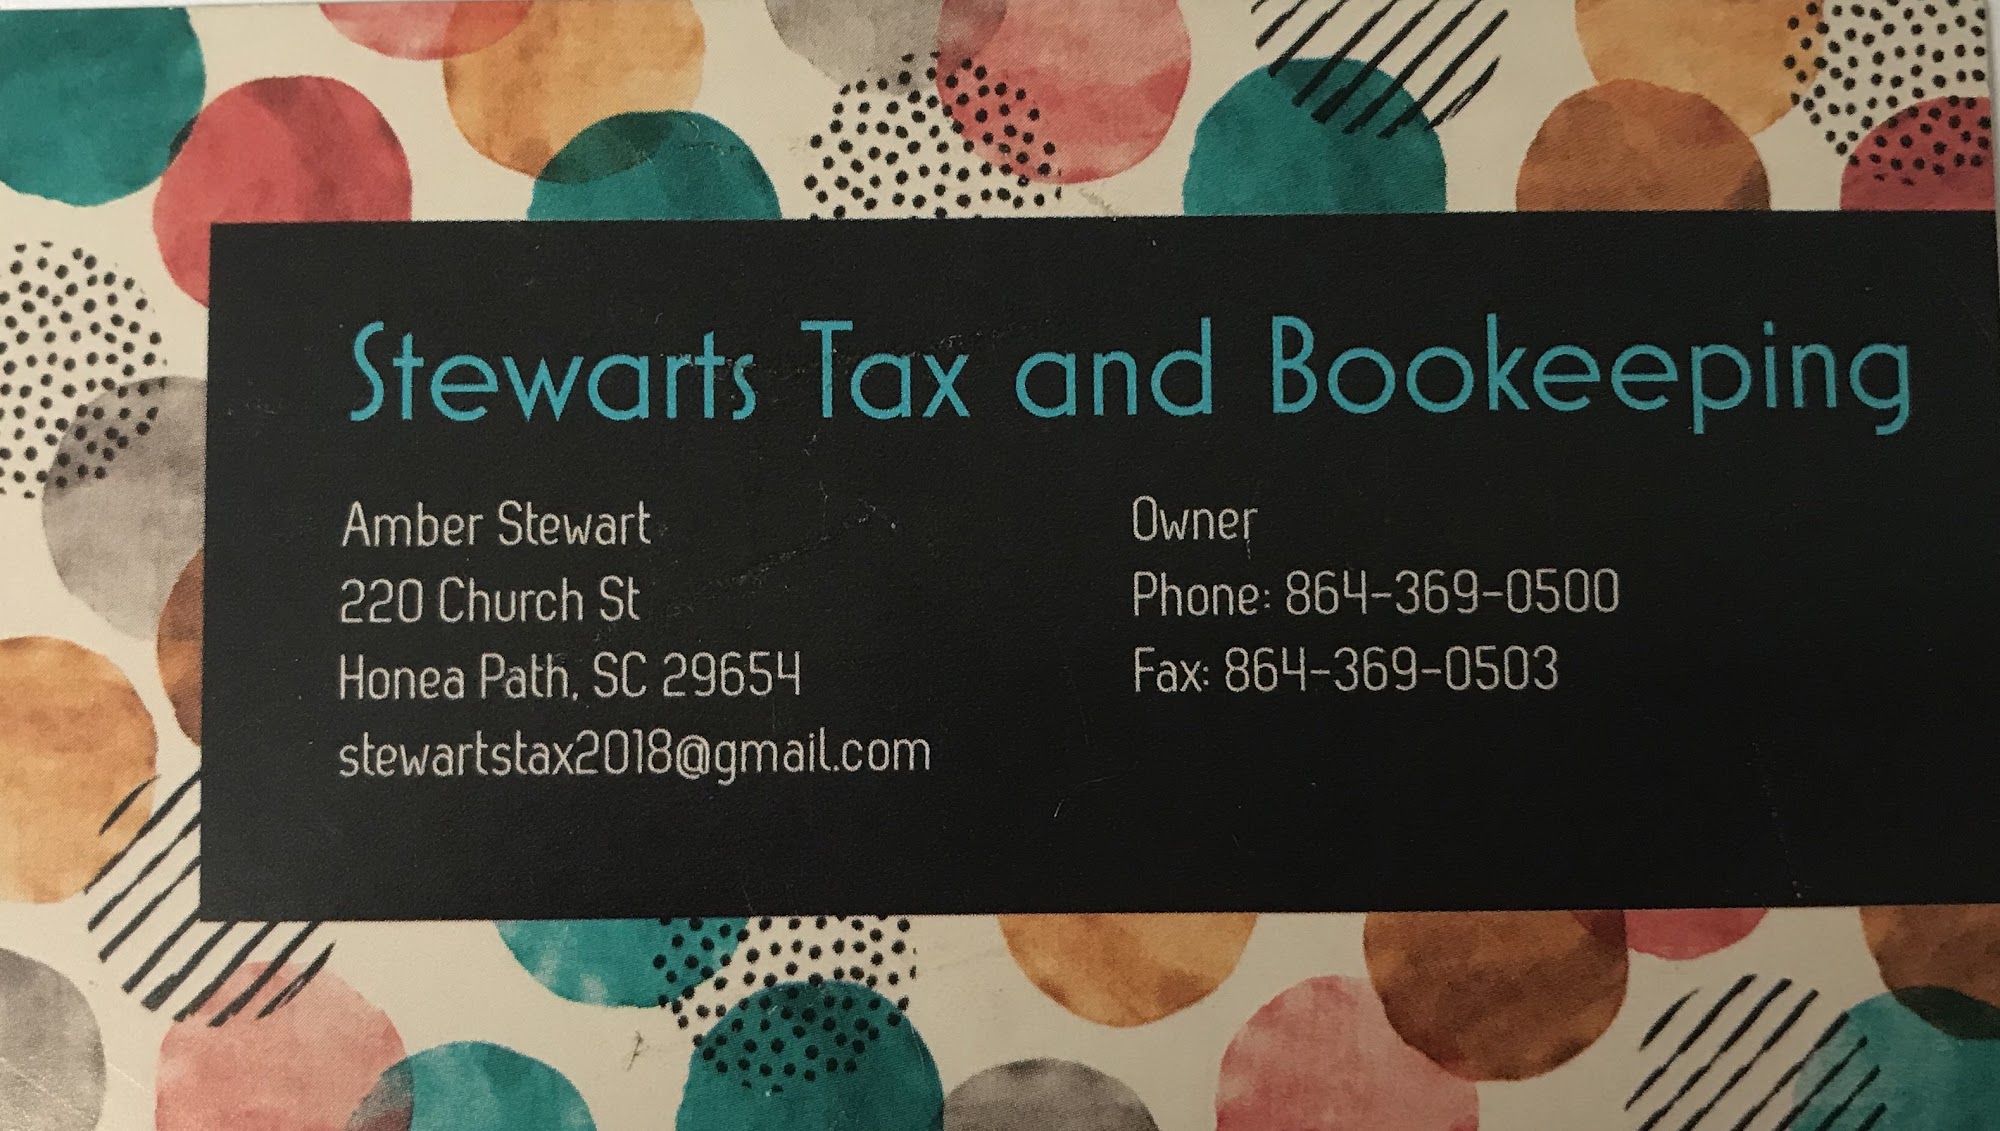 Stewarts Tax and Bookeeping